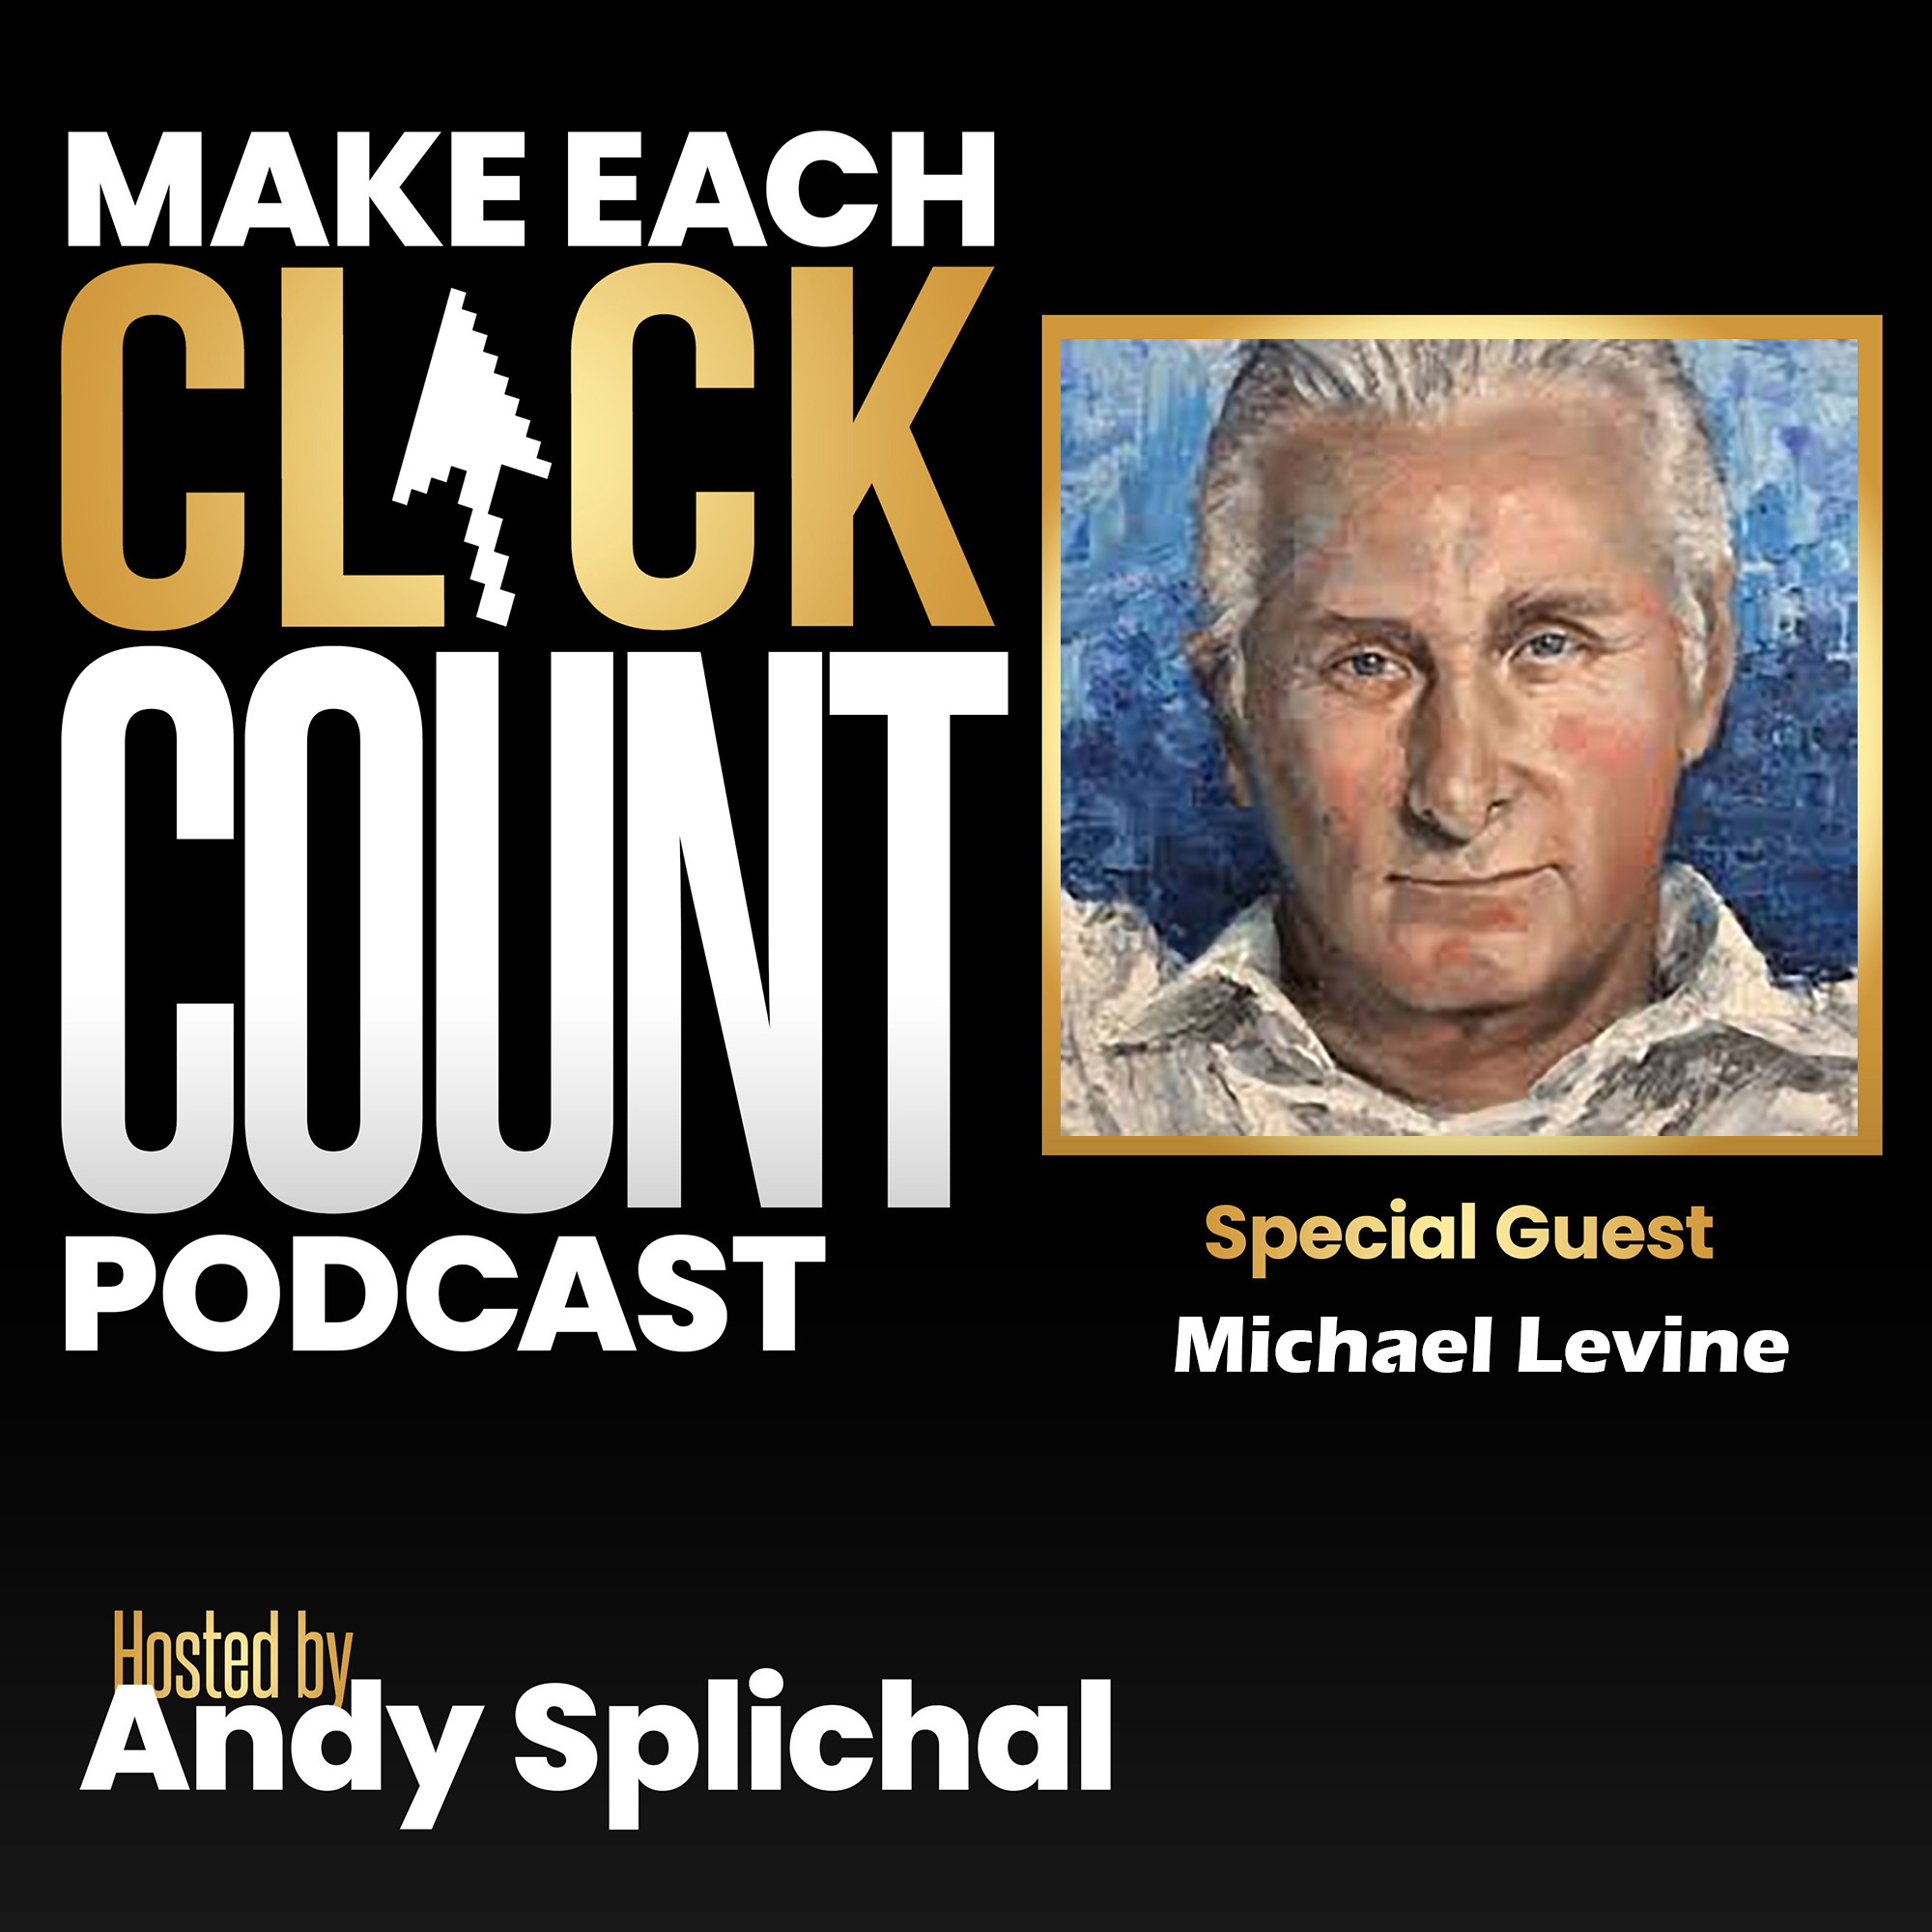 Best of Make Each Click Count Podcast With Michael Levine Image